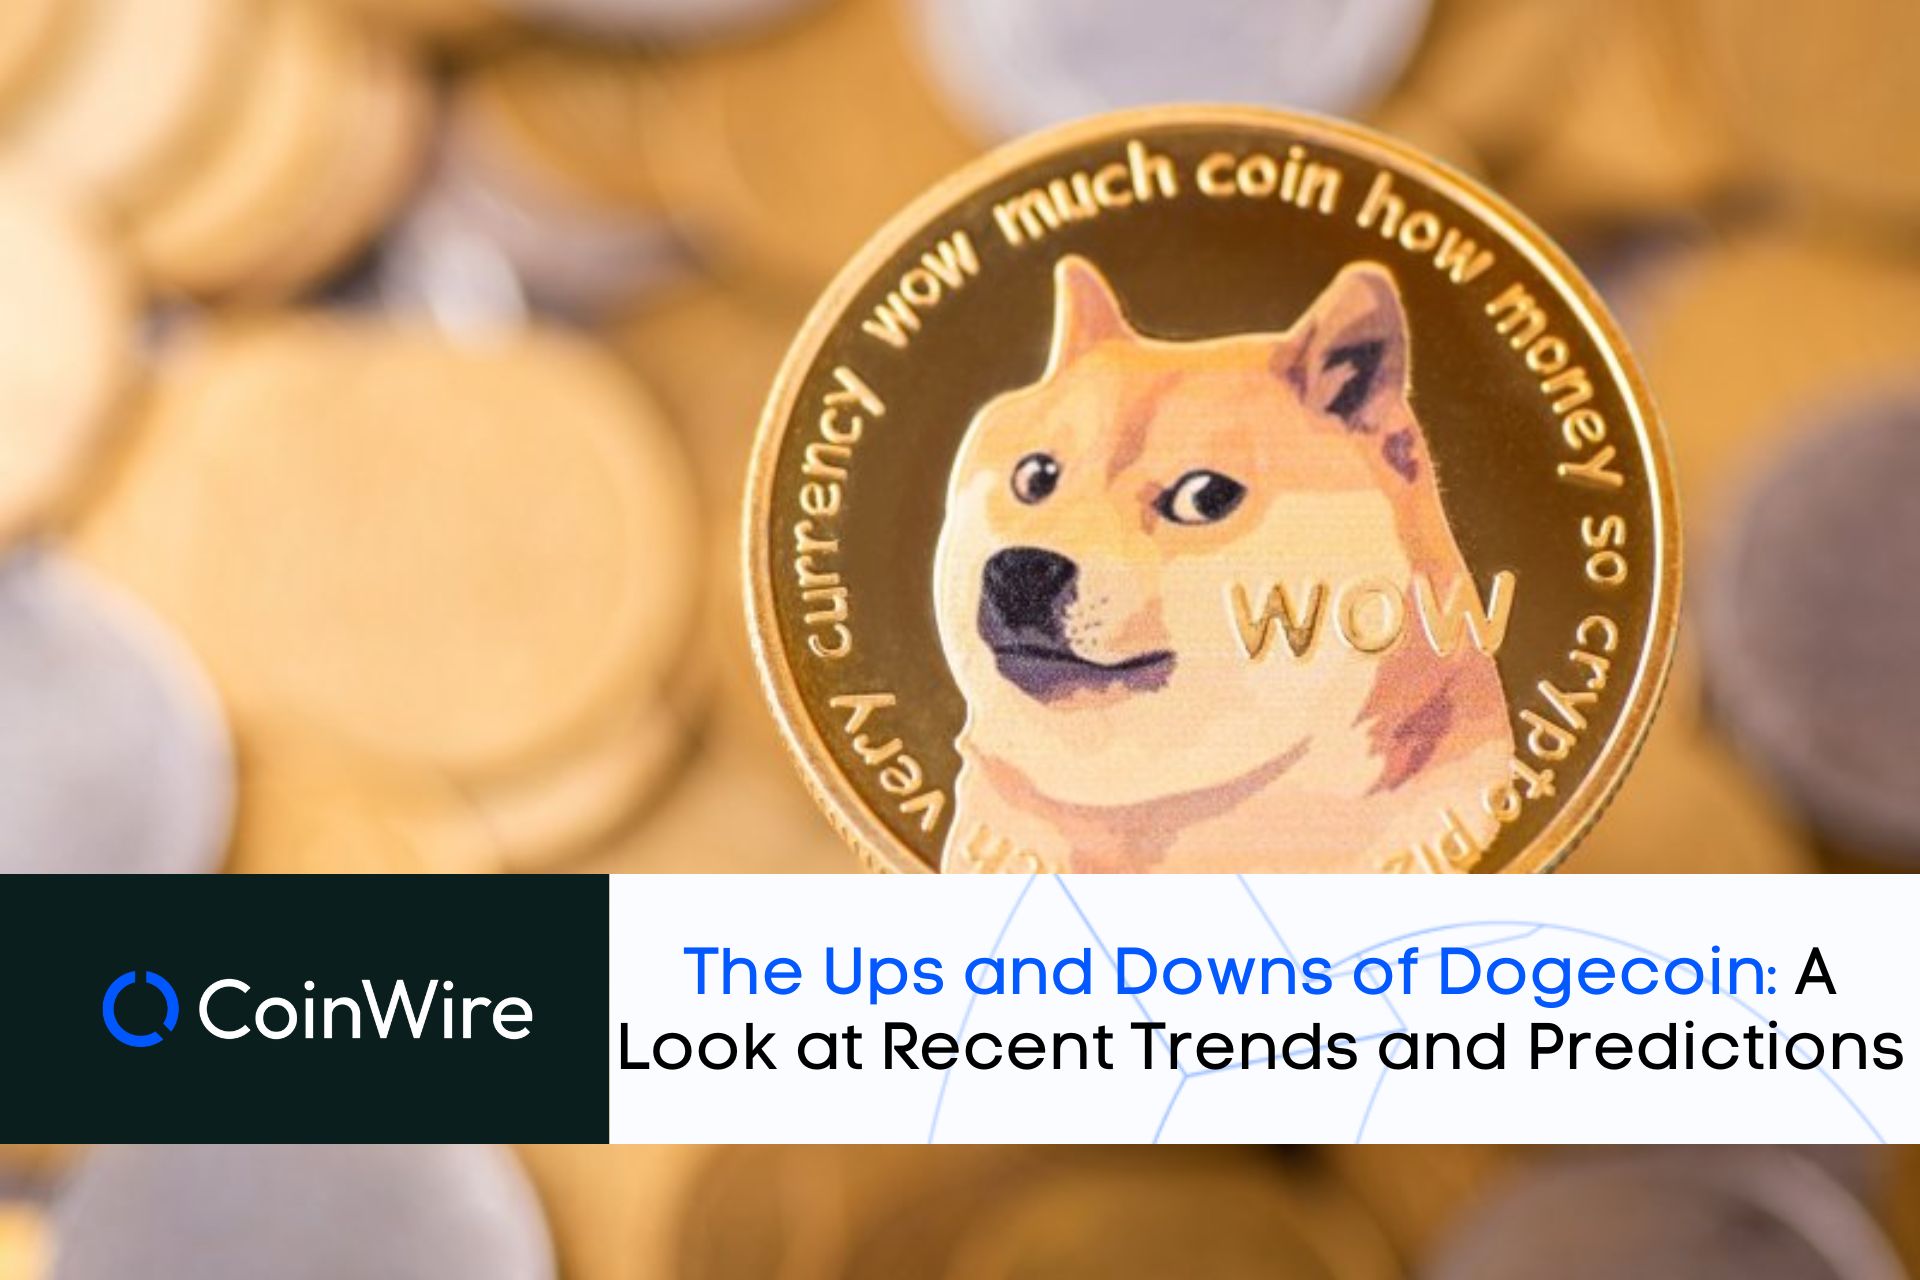 The Ups And Downs Of Dogecoin: A Look At Recent Trends And Predictions